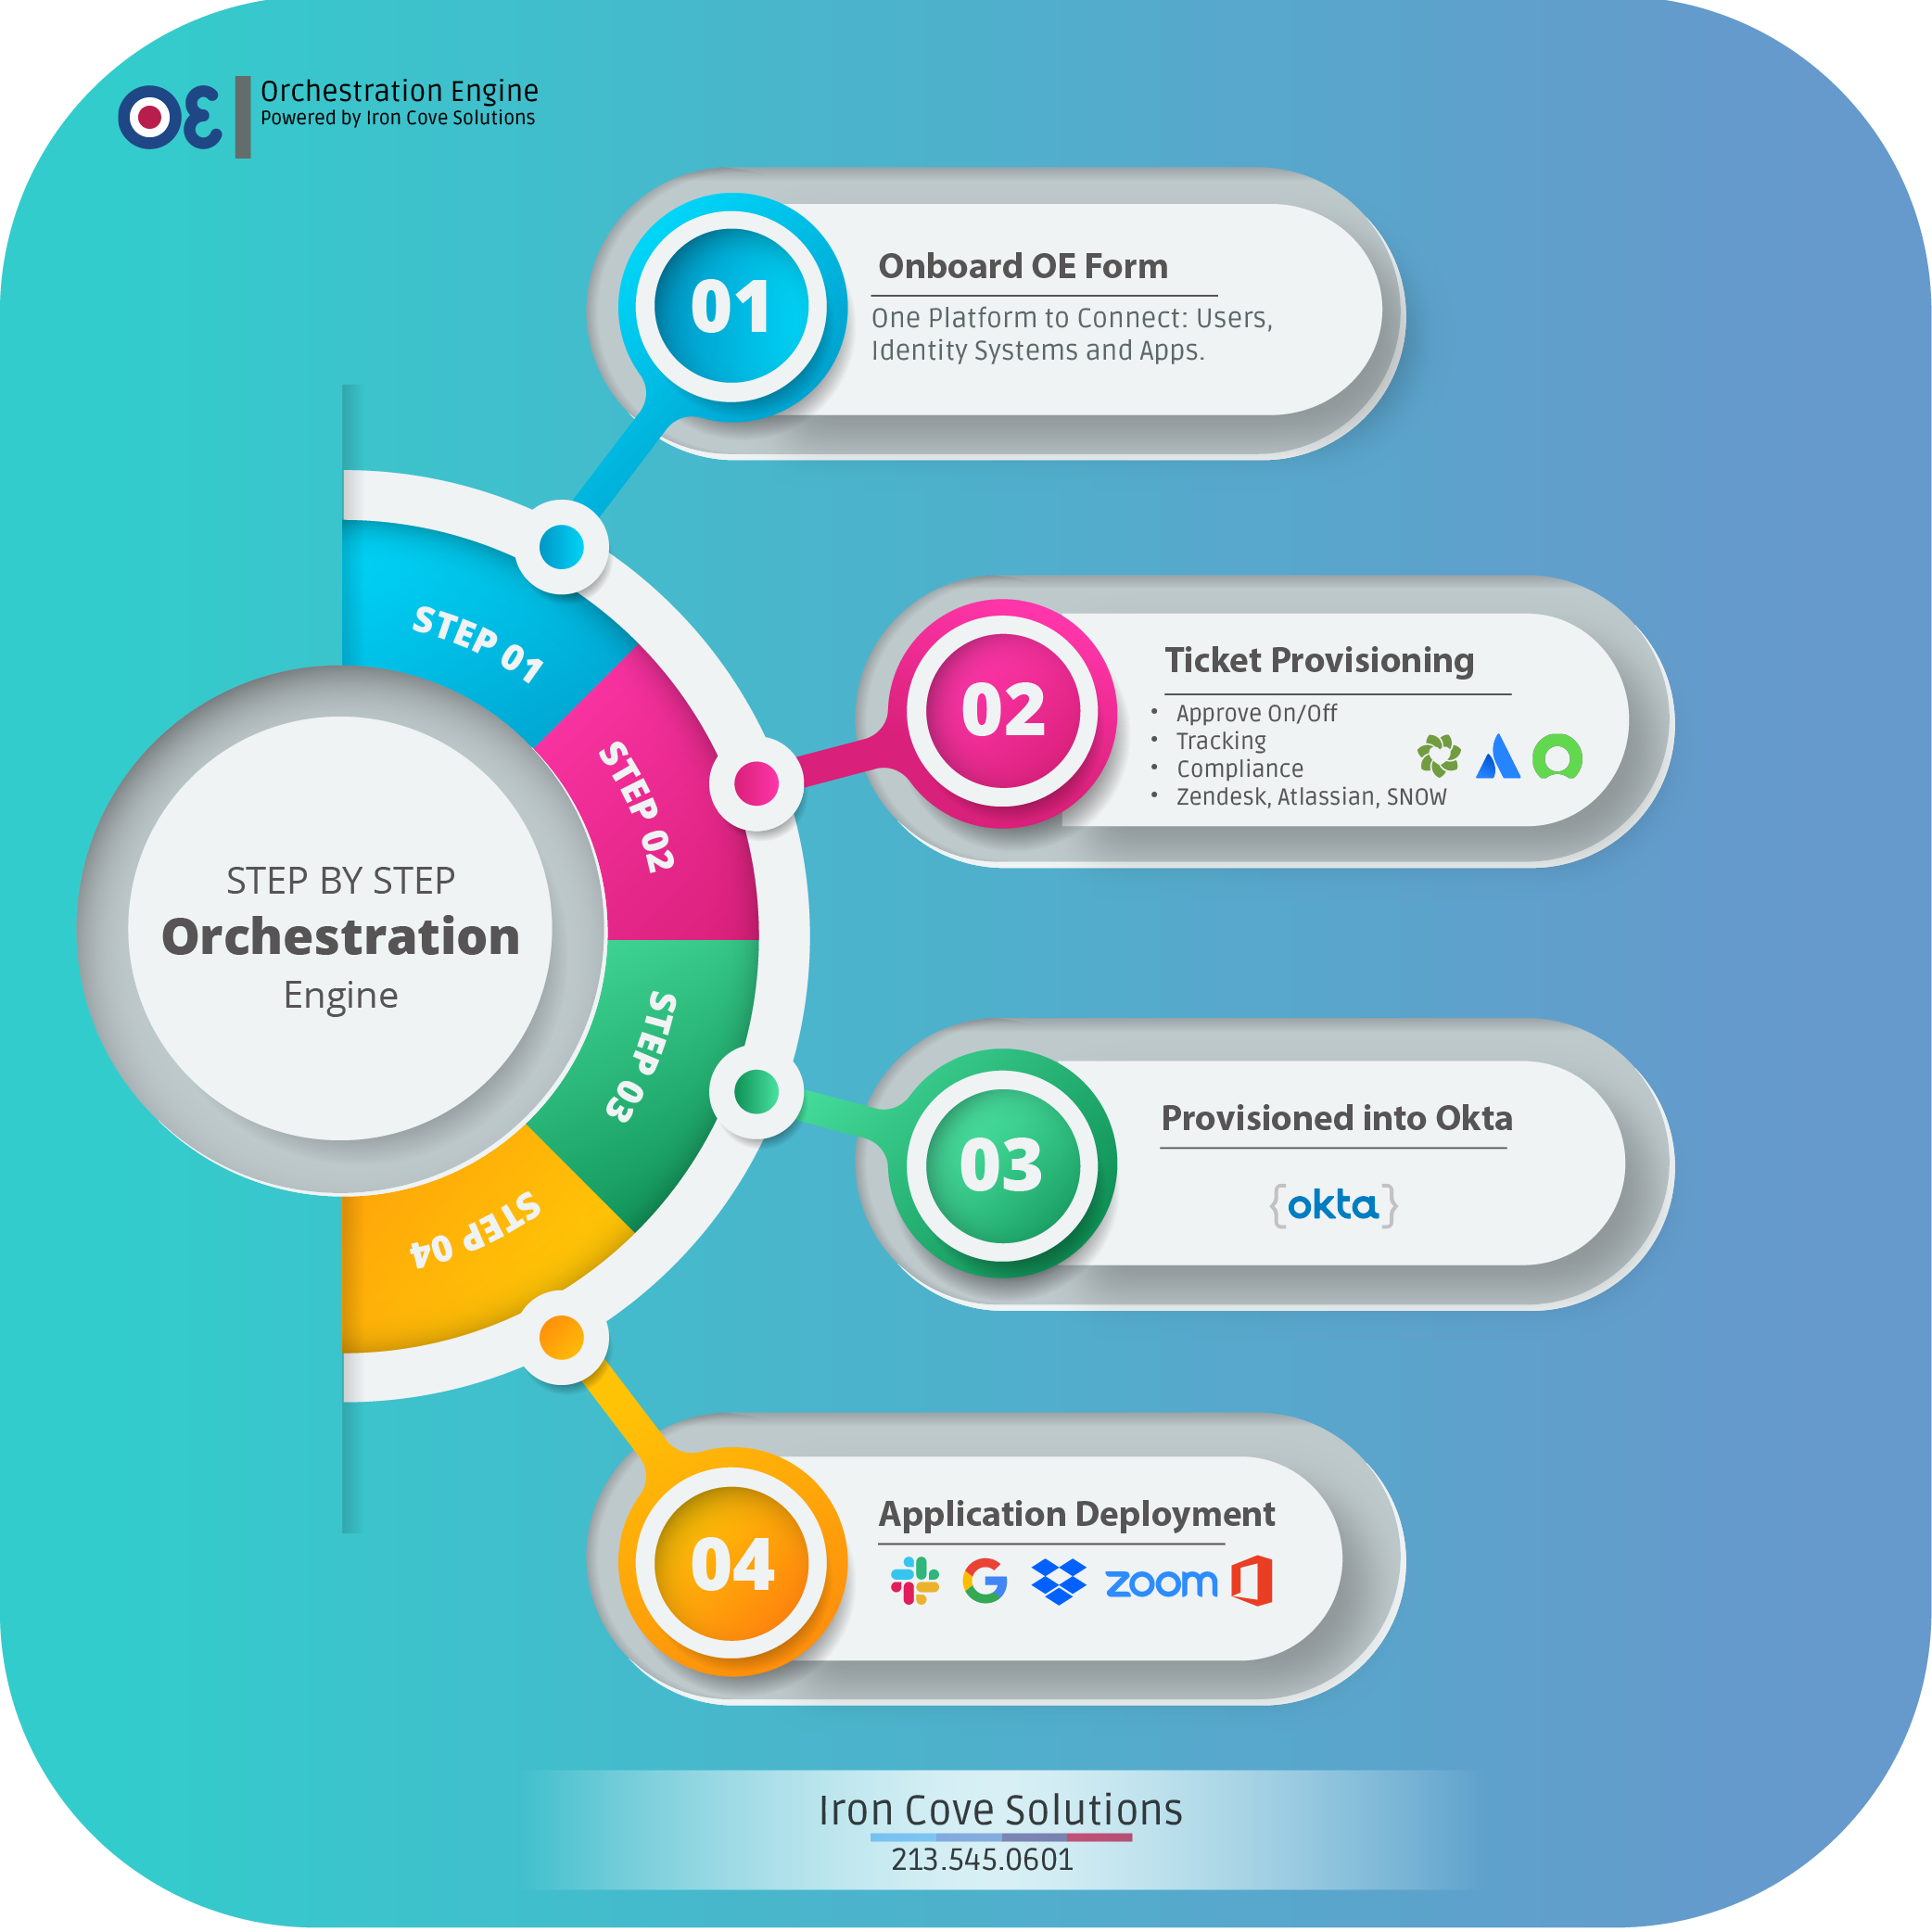 Iron Cove Solutions | Cloud Consulting Firm | Orchestration Engine with Okta